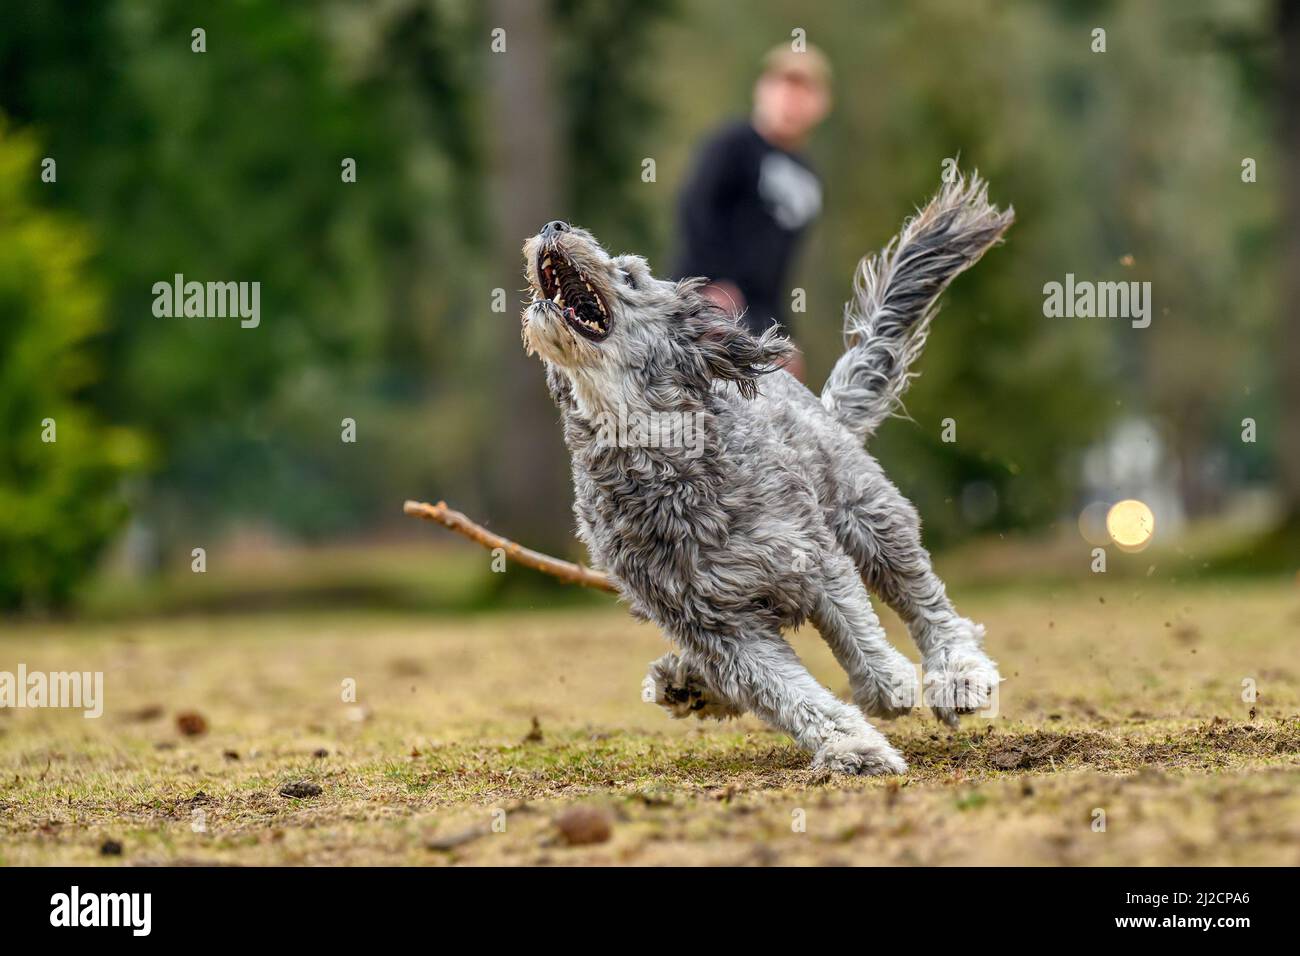 A young and playful goldendoodle dog is captured in high speed motion while he is running fast and jumping high to catch a flying frisbee in midair wh Stock Photo